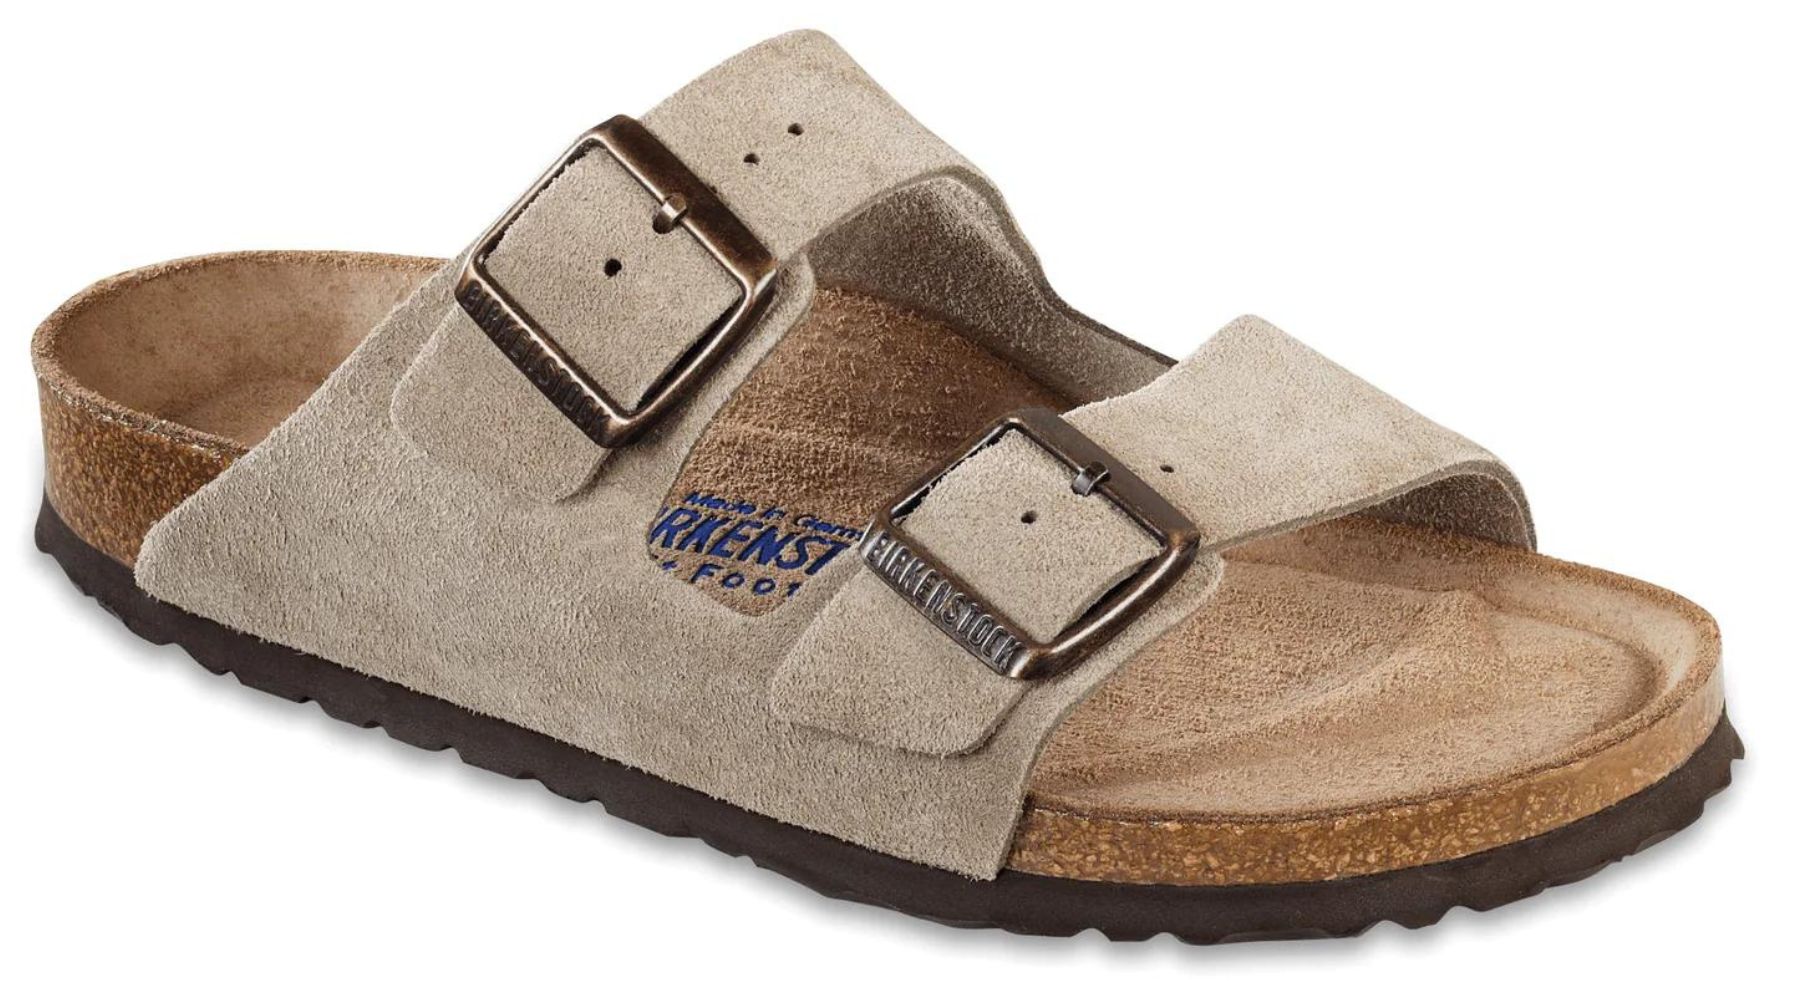 Stepping into Comfort: Exploring the Birkenstock Soft Bed Experience